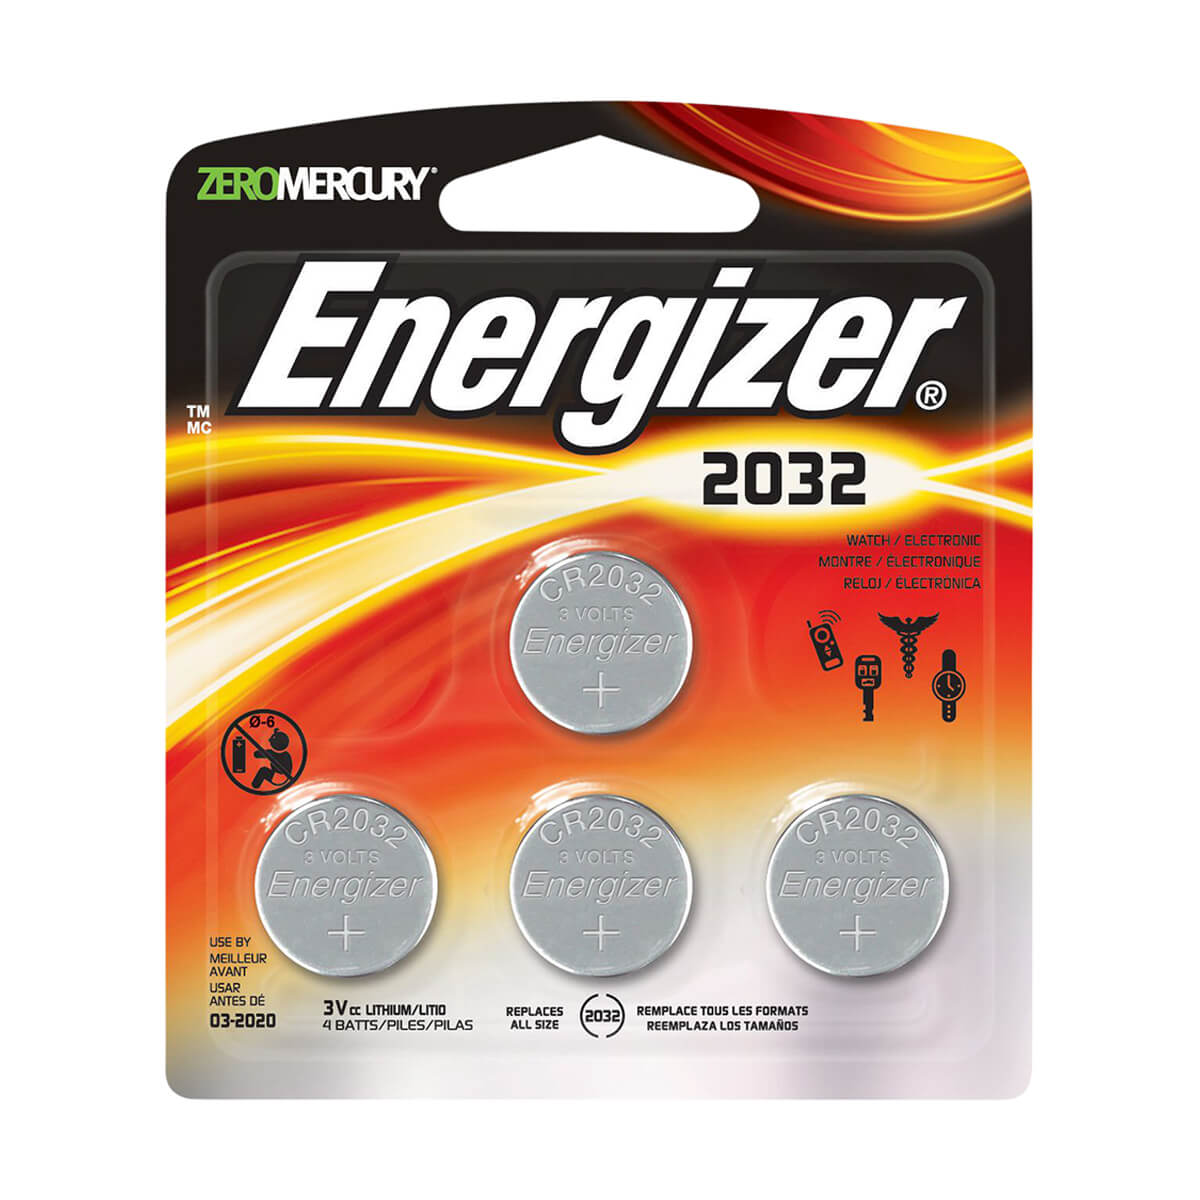 Energizer® 2032 Coin Lithium Batteries - 4 Pack